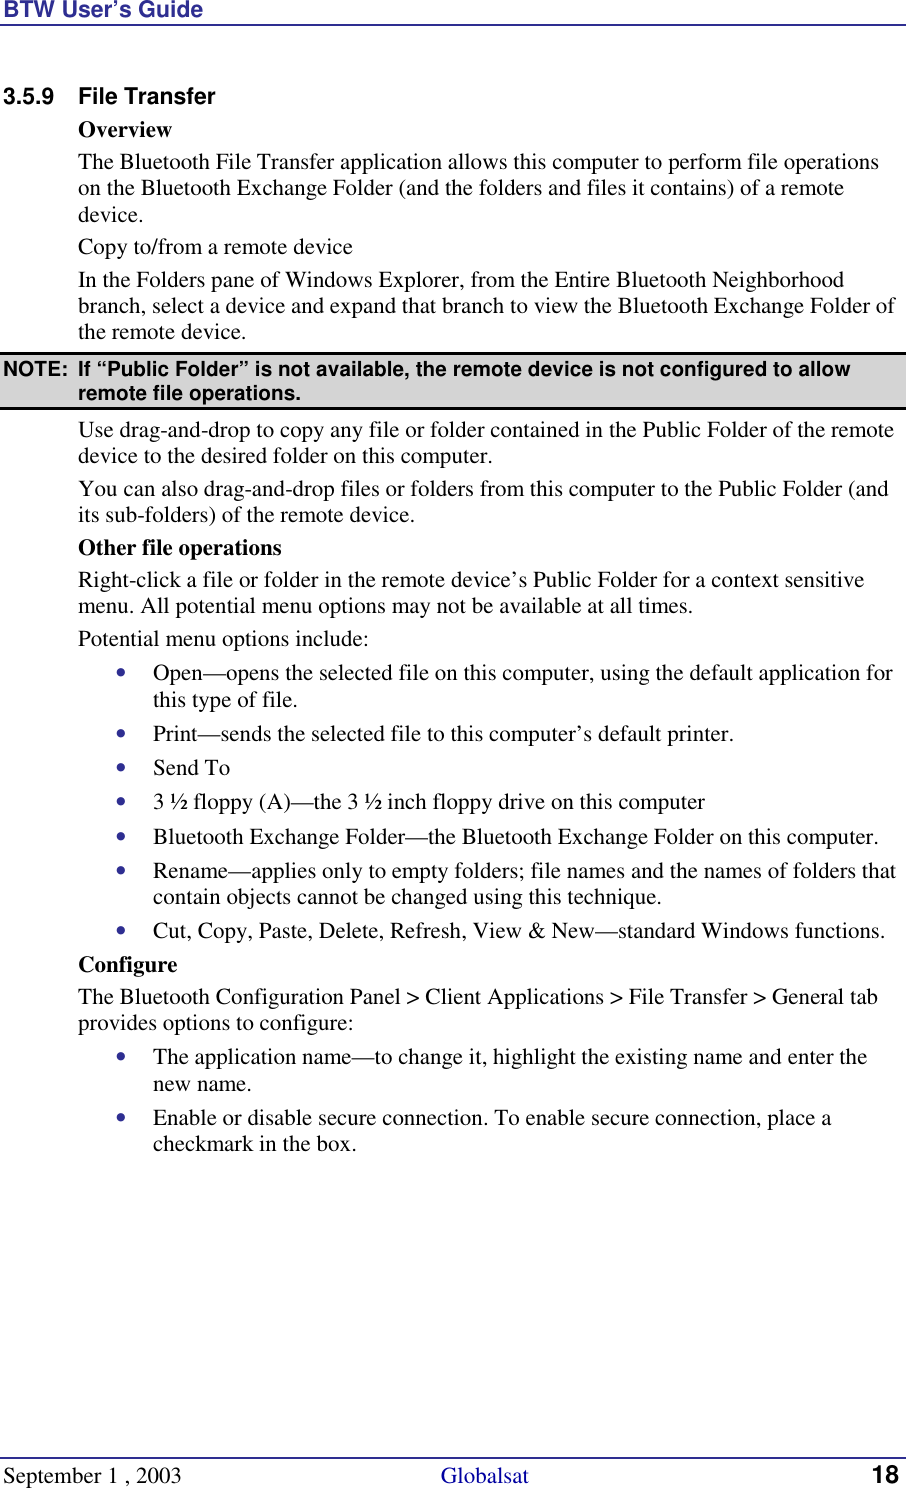 BTW User’s Guide September 1 , 2003                                             Globalsat 18 3.5.9 File Transfer Overview The Bluetooth File Transfer application allows this computer to perform file operations on the Bluetooth Exchange Folder (and the folders and files it contains) of a remote device. Copy to/from a remote device In the Folders pane of Windows Explorer, from the Entire Bluetooth Neighborhood branch, select a device and expand that branch to view the Bluetooth Exchange Folder of the remote device. NOTE:  If “Public Folder” is not available, the remote device is not configured to allow remote file operations. Use drag-and-drop to copy any file or folder contained in the Public Folder of the remote device to the desired folder on this computer. You can also drag-and-drop files or folders from this computer to the Public Folder (and its sub-folders) of the remote device. Other file operations Right-click a file or folder in the remote device’s Public Folder for a context sensitive menu. All potential menu options may not be available at all times. Potential menu options include: •  Open—opens the selected file on this computer, using the default application for this type of file. •  Print—sends the selected file to this computer’s default printer. •  Send To •  3 ½ floppy (A)—the 3 ½ inch floppy drive on this computer •  Bluetooth Exchange Folder—the Bluetooth Exchange Folder on this computer. •  Rename—applies only to empty folders; file names and the names of folders that contain objects cannot be changed using this technique. •  Cut, Copy, Paste, Delete, Refresh, View &amp; New—standard Windows functions. Configure The Bluetooth Configuration Panel &gt; Client Applications &gt; File Transfer &gt; General tab provides options to configure: •  The application name—to change it, highlight the existing name and enter the new name. •  Enable or disable secure connection. To enable secure connection, place a checkmark in the box. 